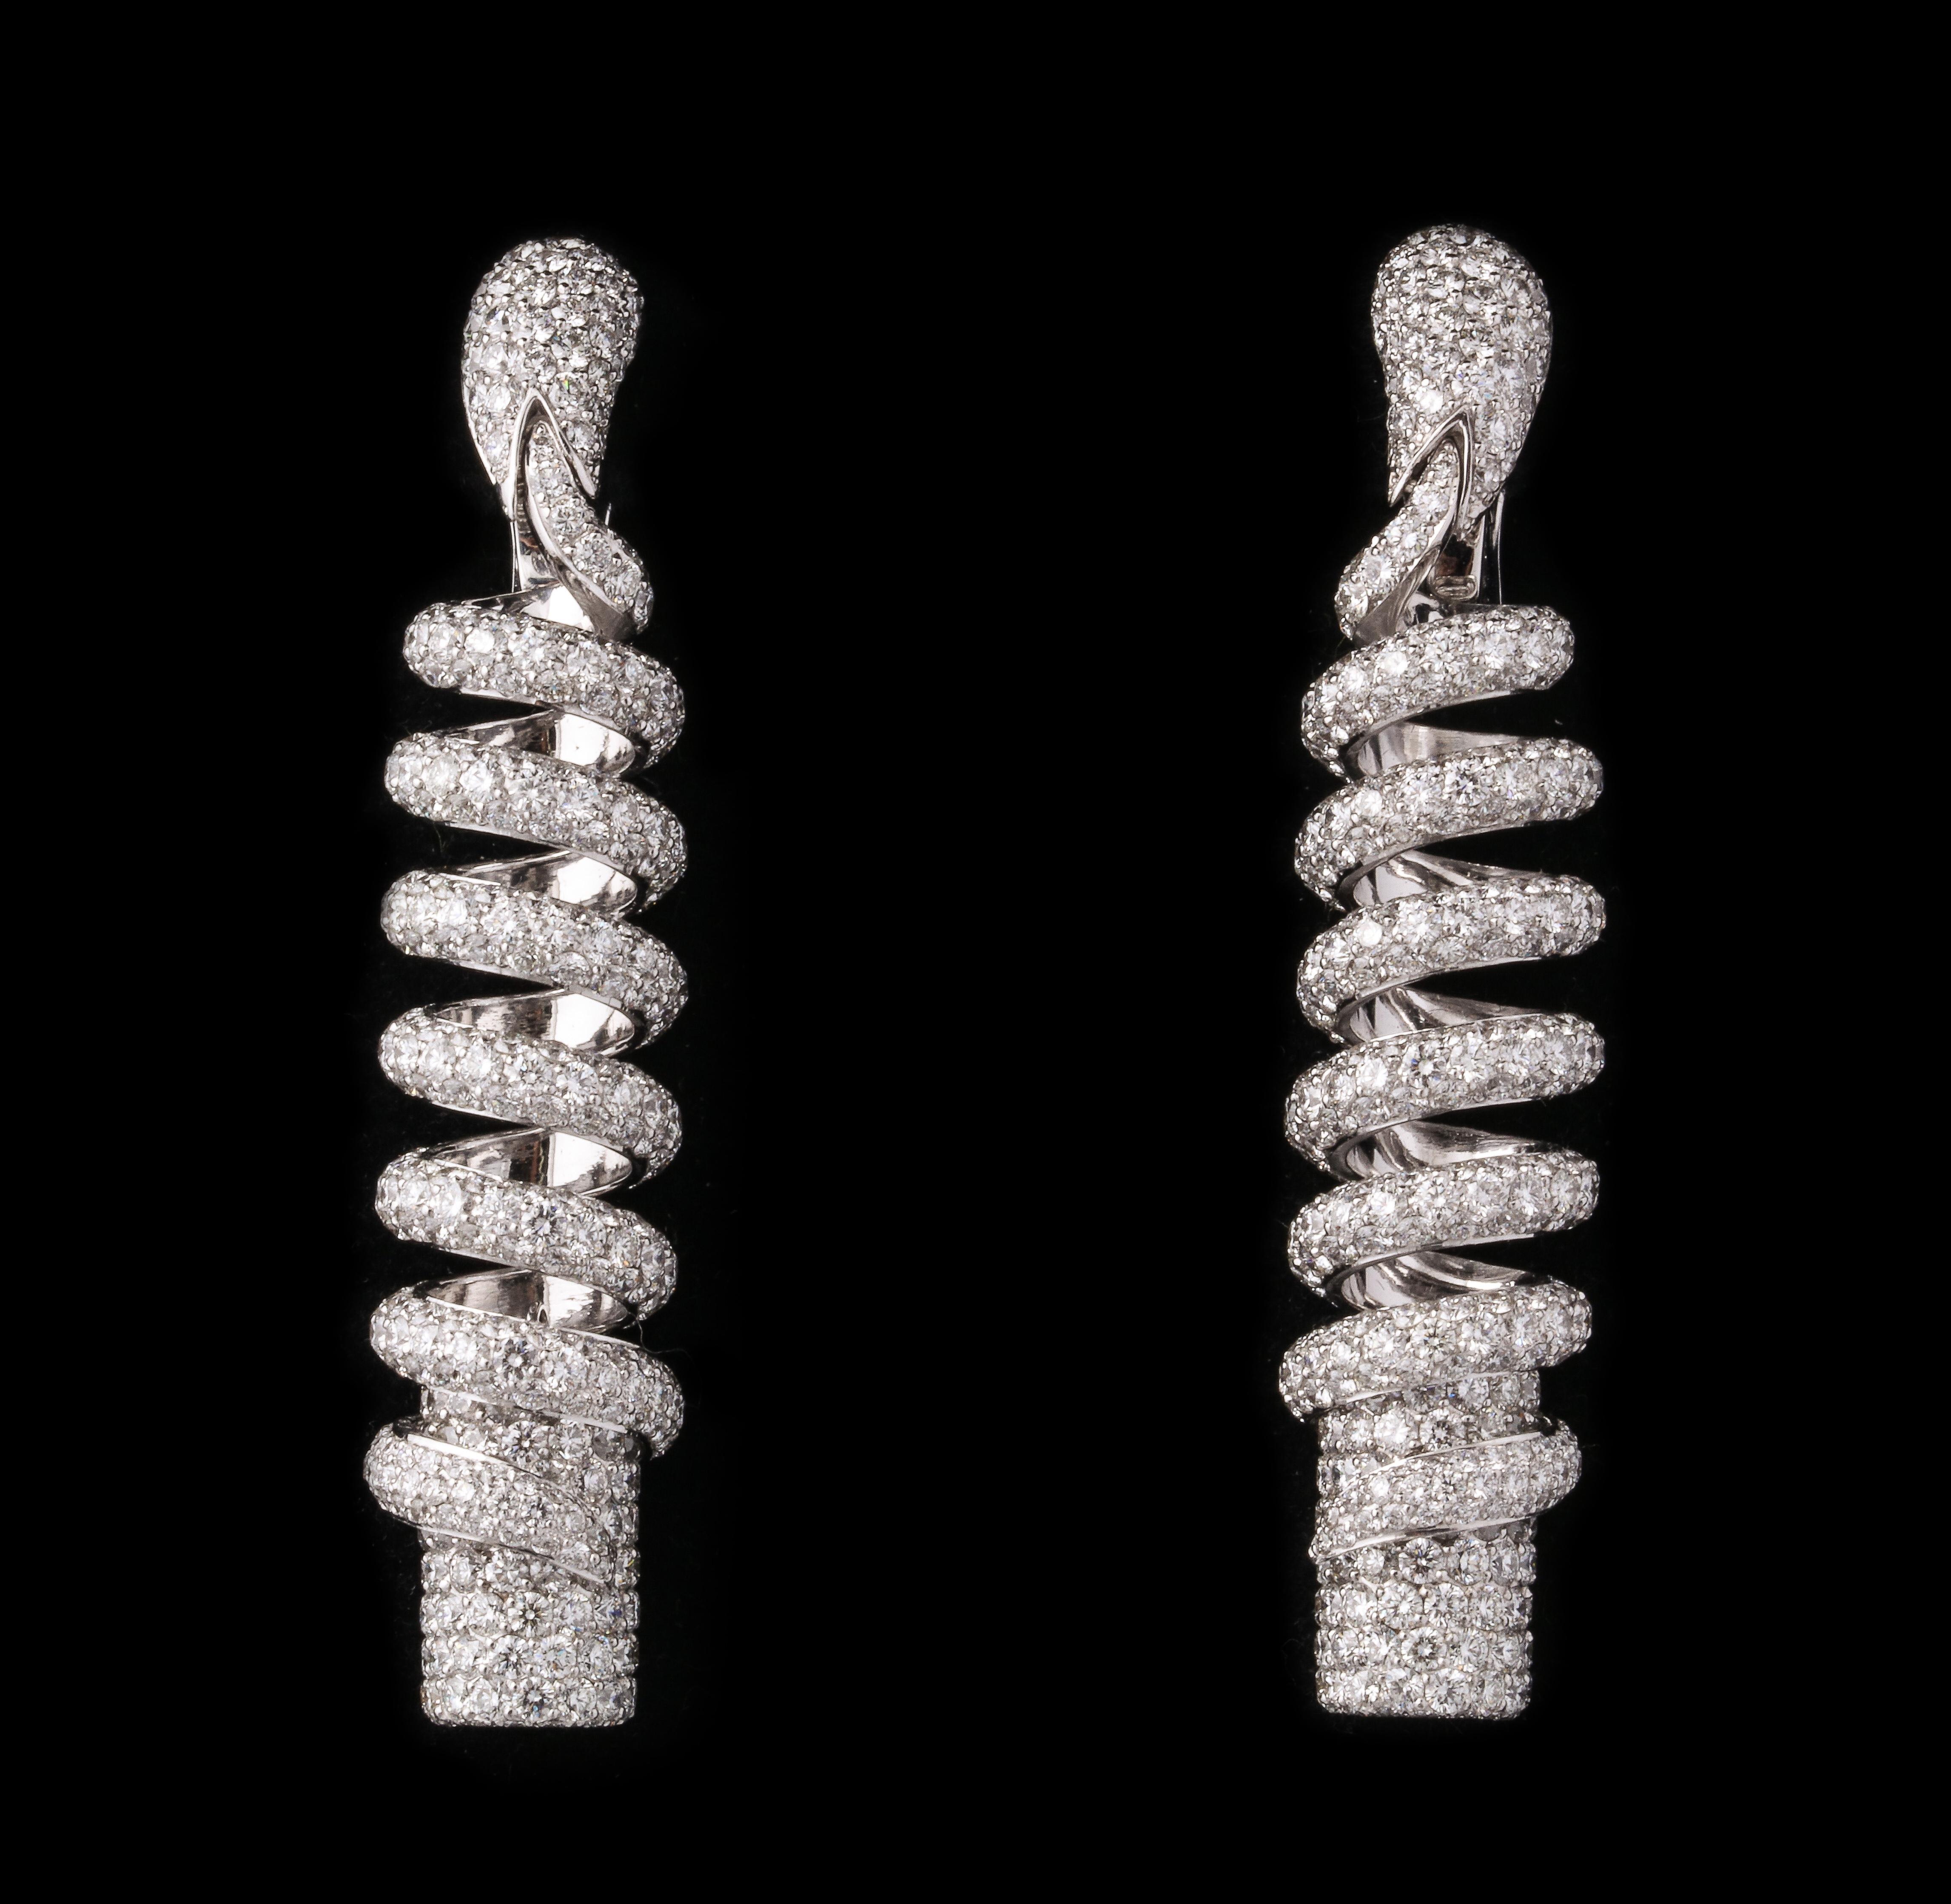 de Grisogono Diamond Pave White Gold snake earrings. 46 grams. Marked 750 de Grisogono.  Approximately 10 cts of fine white full cut diamonds.  2 3/4 inches long and 1/2